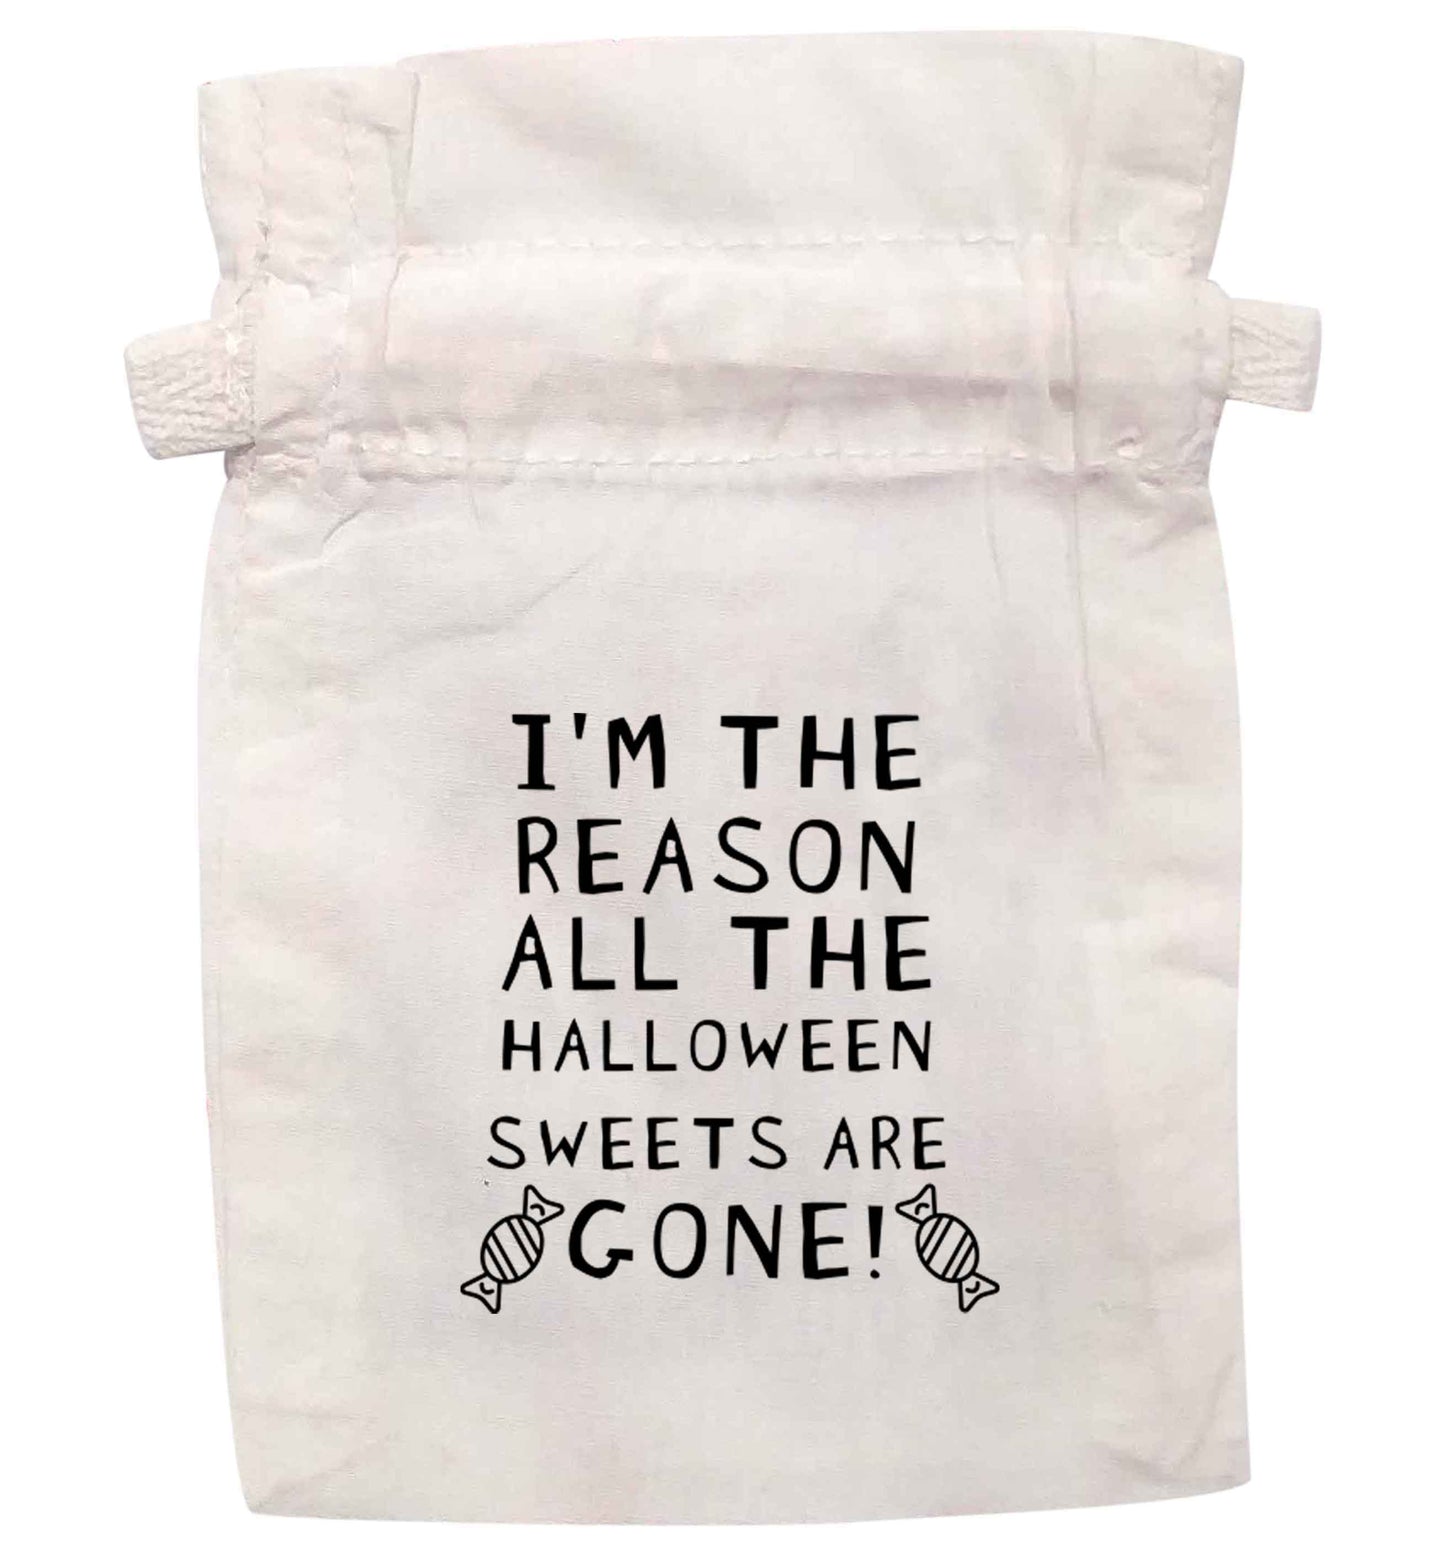 I'm the reason all of the halloween sweets are gone | XS - L | Pouch / Drawstring bag / Sack | Organic Cotton | Bulk discounts available!